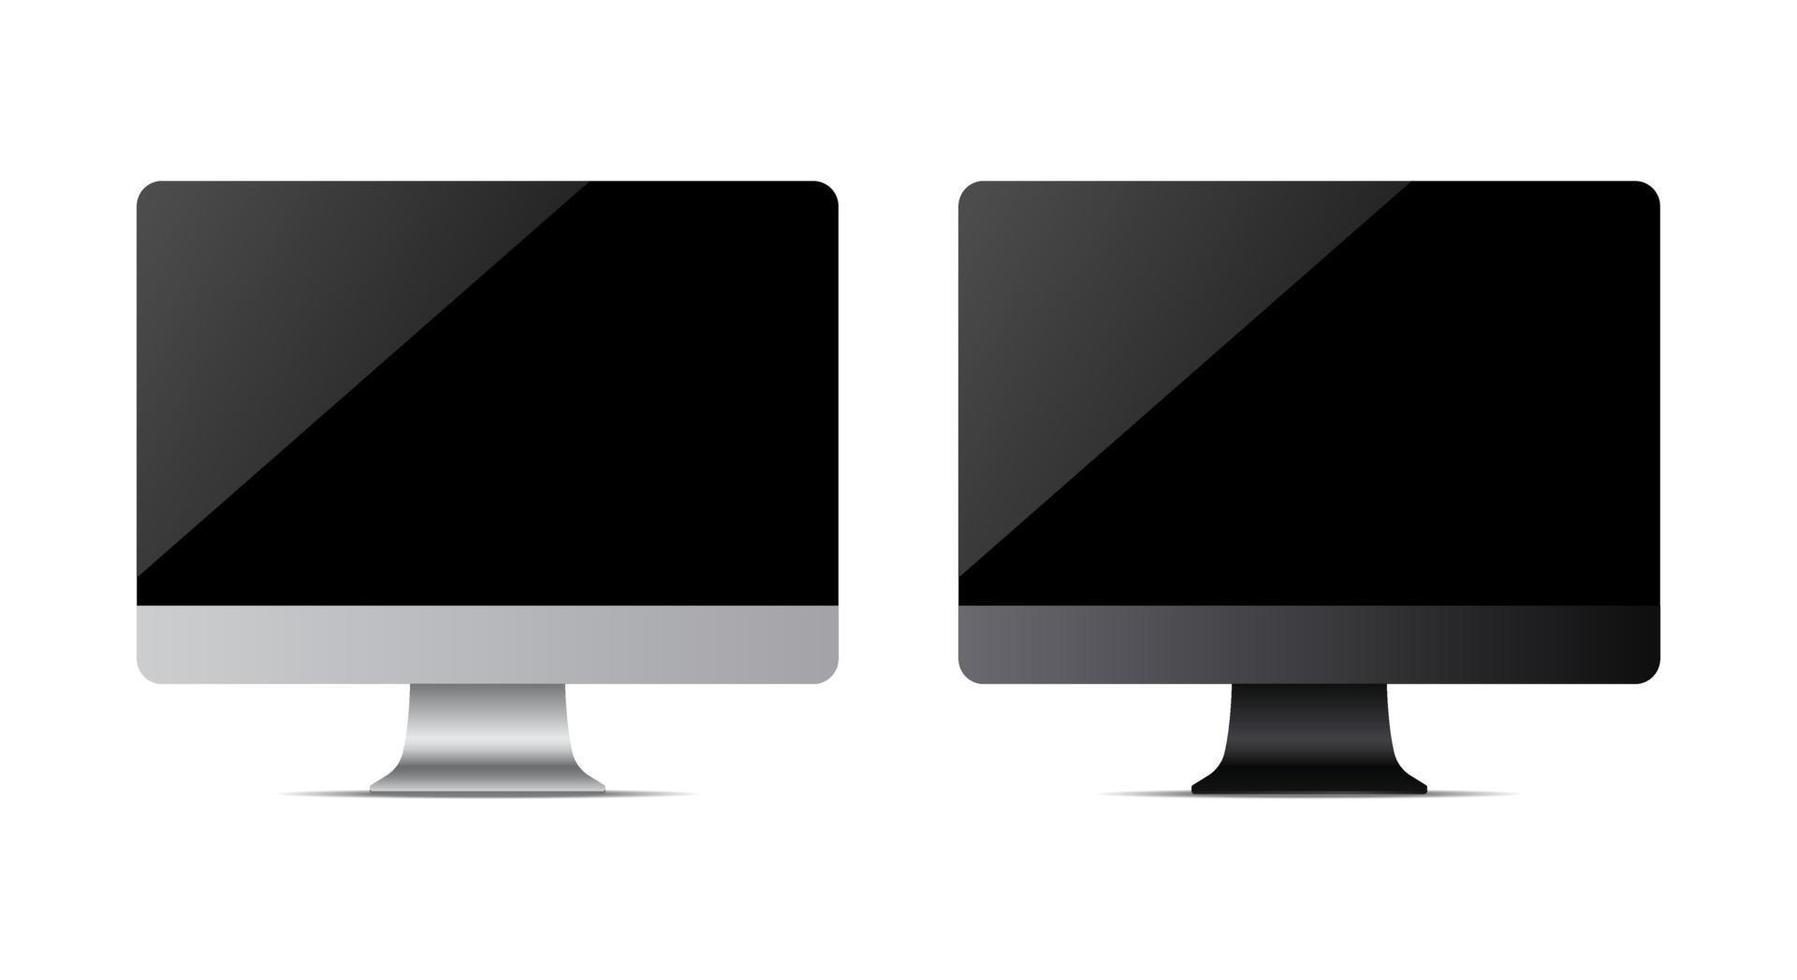 Realistic Modern Monitor Design. Vector Illustration. Mock Up Isolated On White Background